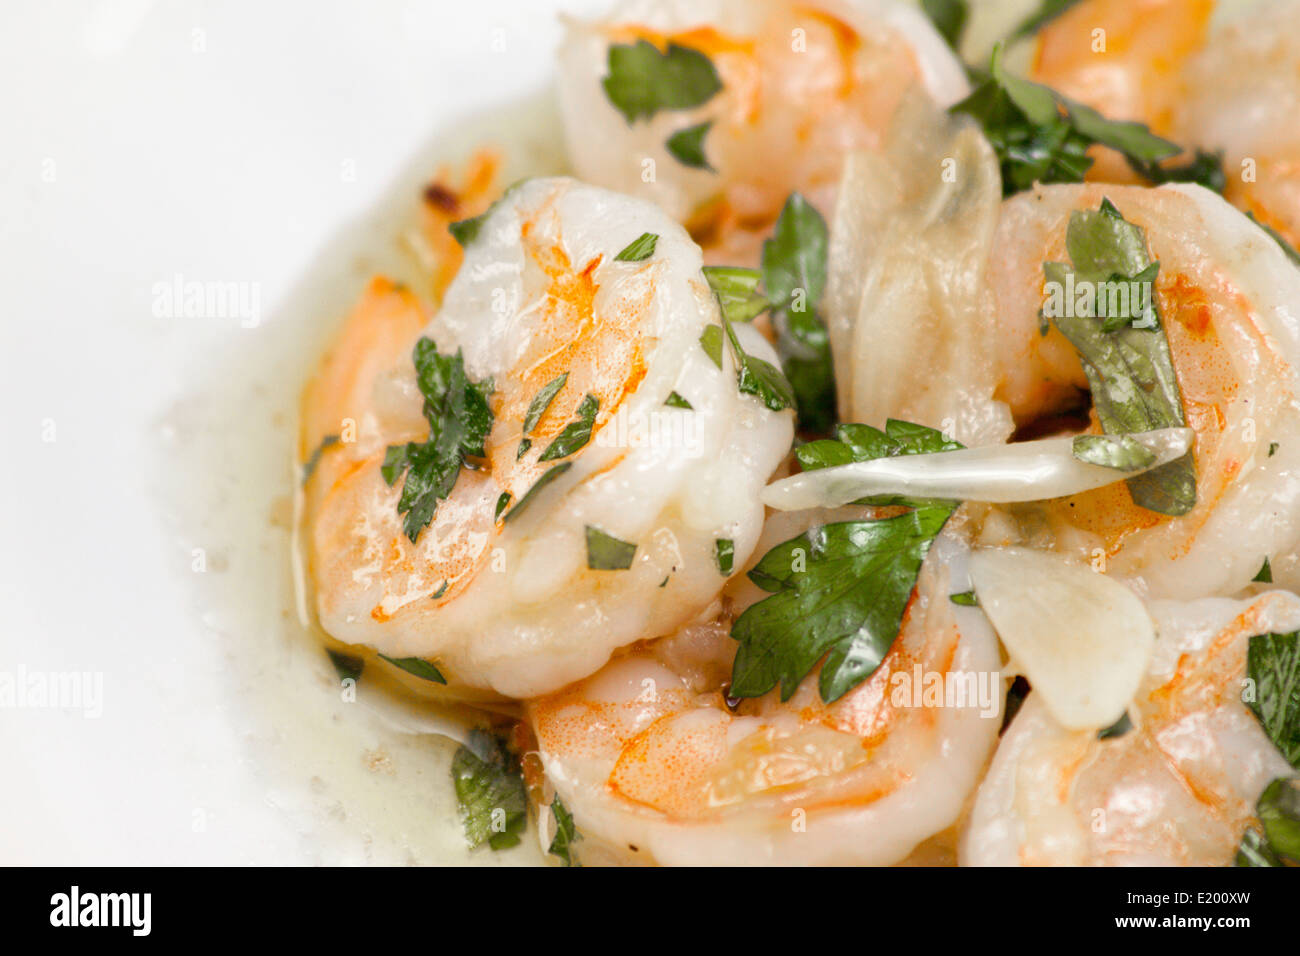 Close up of coked shrimp in olive oil seasoned with garlic and parsley. Stock Photo